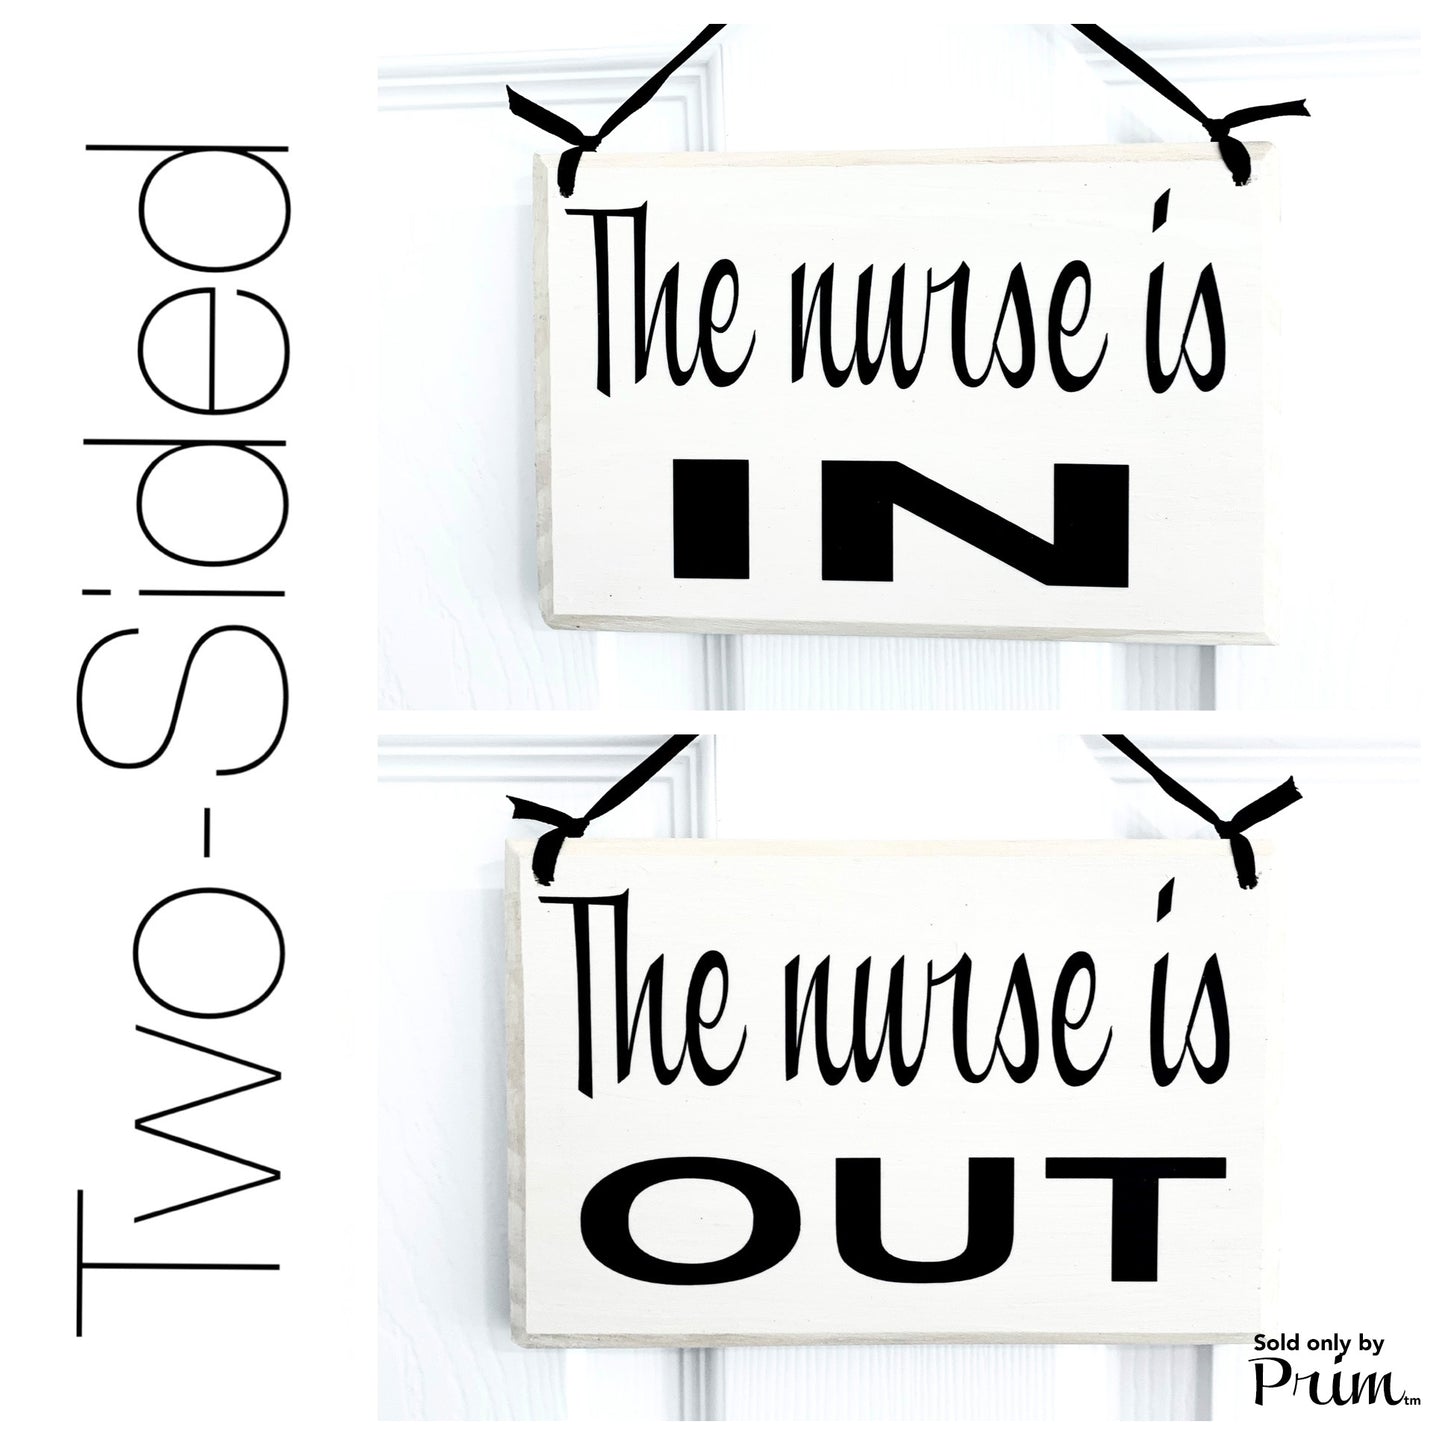 Designs by Prim 8x6 The Nurse is In Out Custom Wood Sign | Doctor Room Available With a Patient Please Do Not Disturb | Office Business Unavailable Plaque